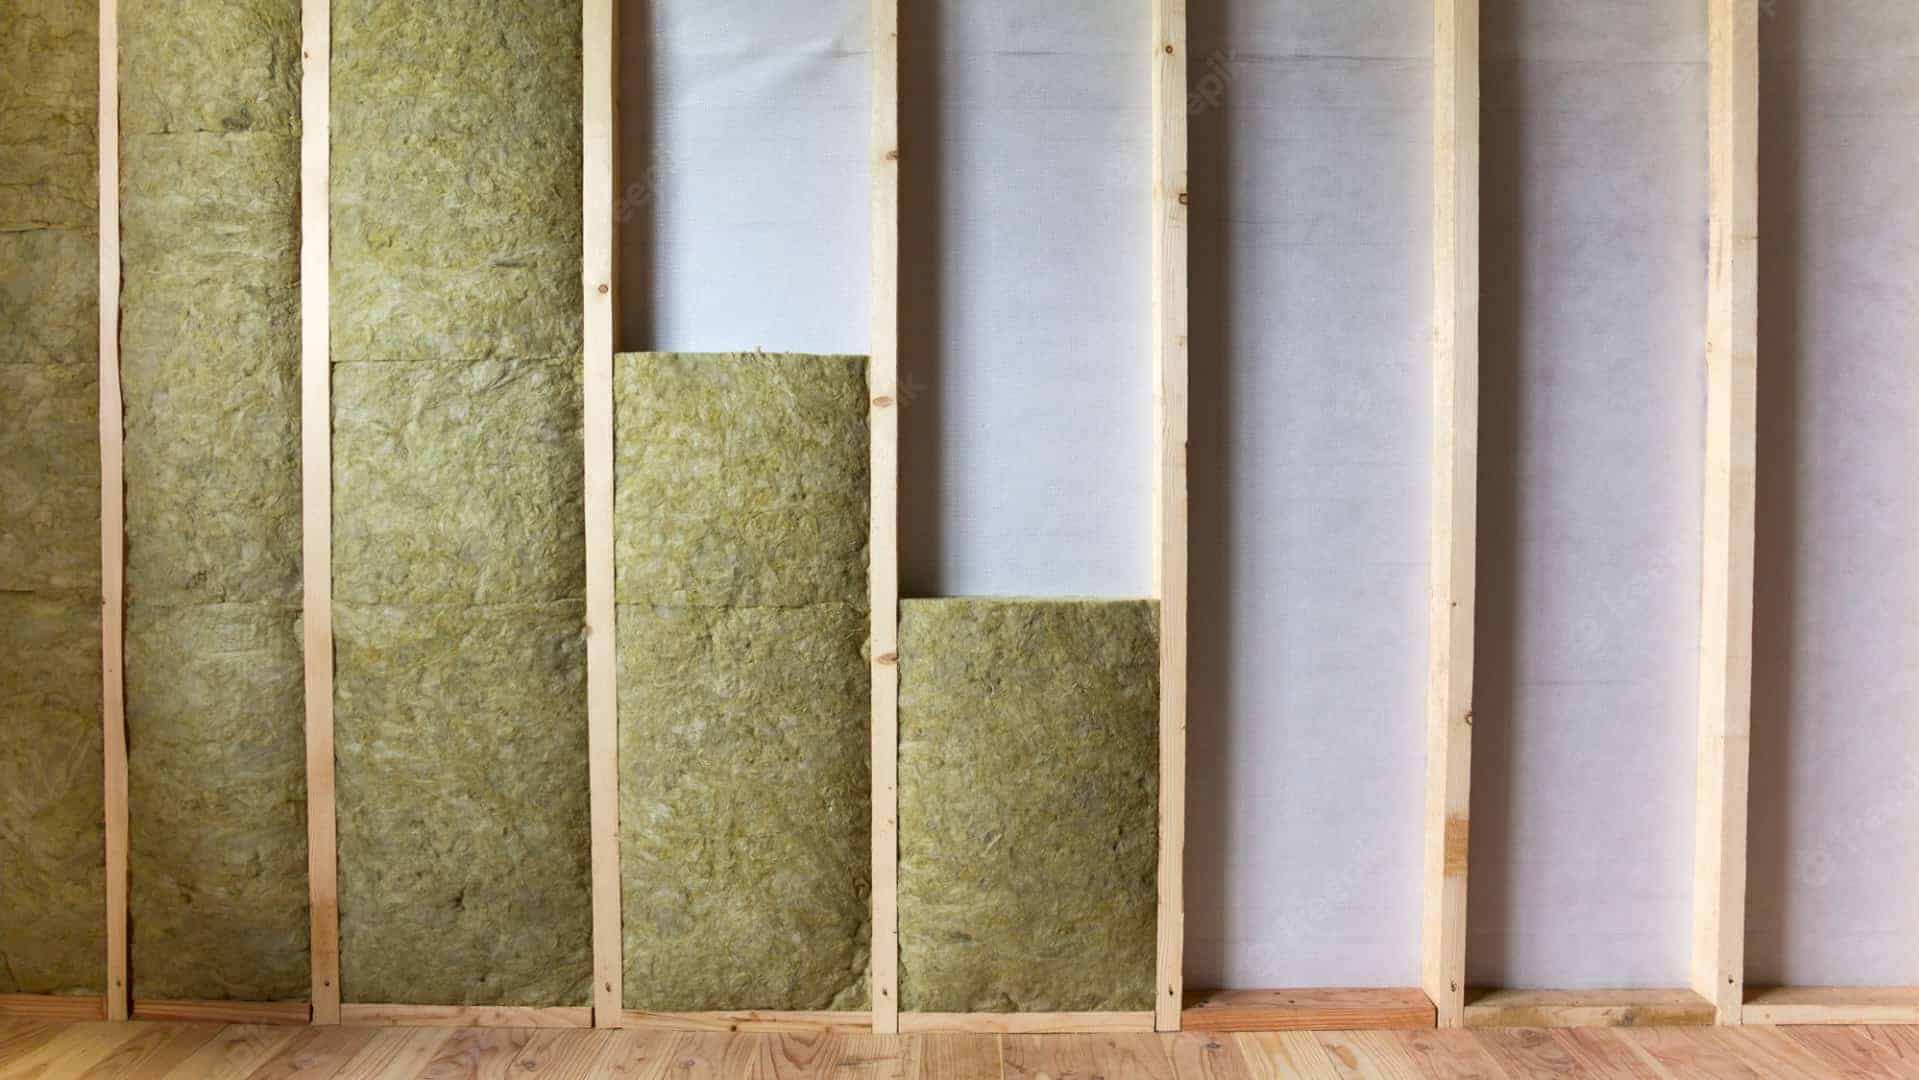 Diversified Energy offers professional Rockwool insulation installation services across the greater New Orleans region. Contact Us Today!